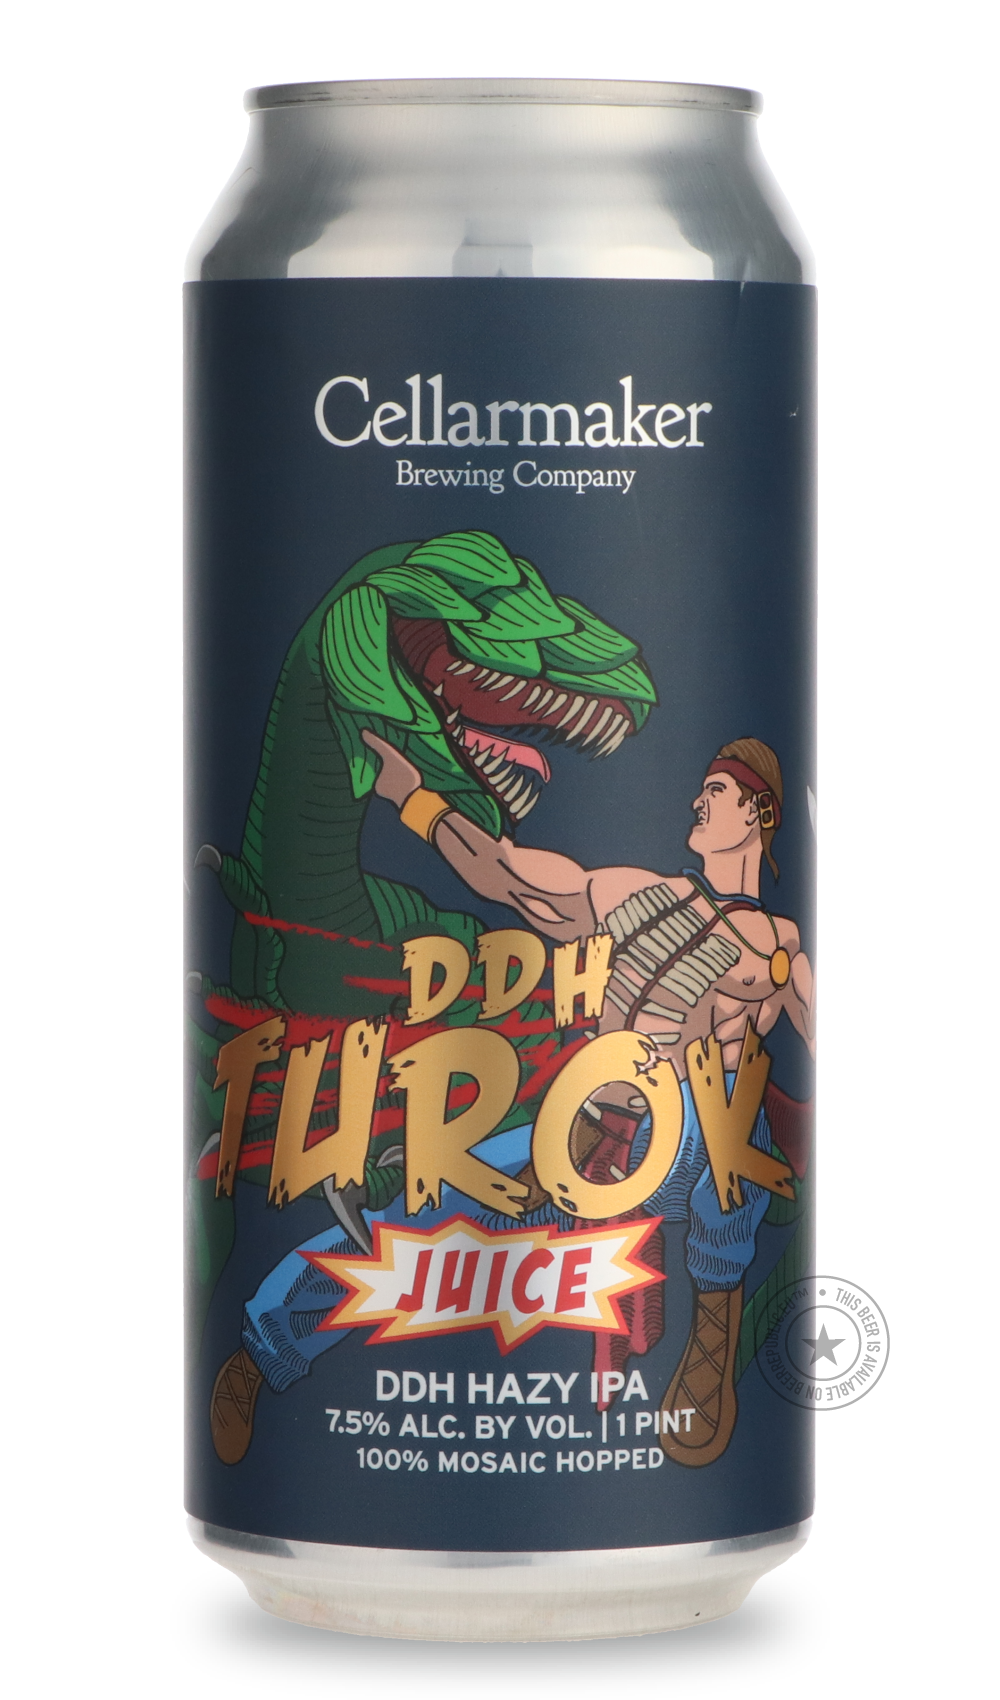 -Cellarmaker- DDH Turok Juice-IPA- Only @ Beer Republic - The best online beer store for American & Canadian craft beer - Buy beer online from the USA and Canada - Bier online kopen - Amerikaans bier kopen - Craft beer store - Craft beer kopen - Amerikanisch bier kaufen - Bier online kaufen - Acheter biere online - IPA - Stout - Porter - New England IPA - Hazy IPA - Imperial Stout - Barrel Aged - Barrel Aged Imperial Stout - Brown - Dark beer - Blond - Blonde - Pilsner - Lager - Wheat - Weizen - Amber - Bar